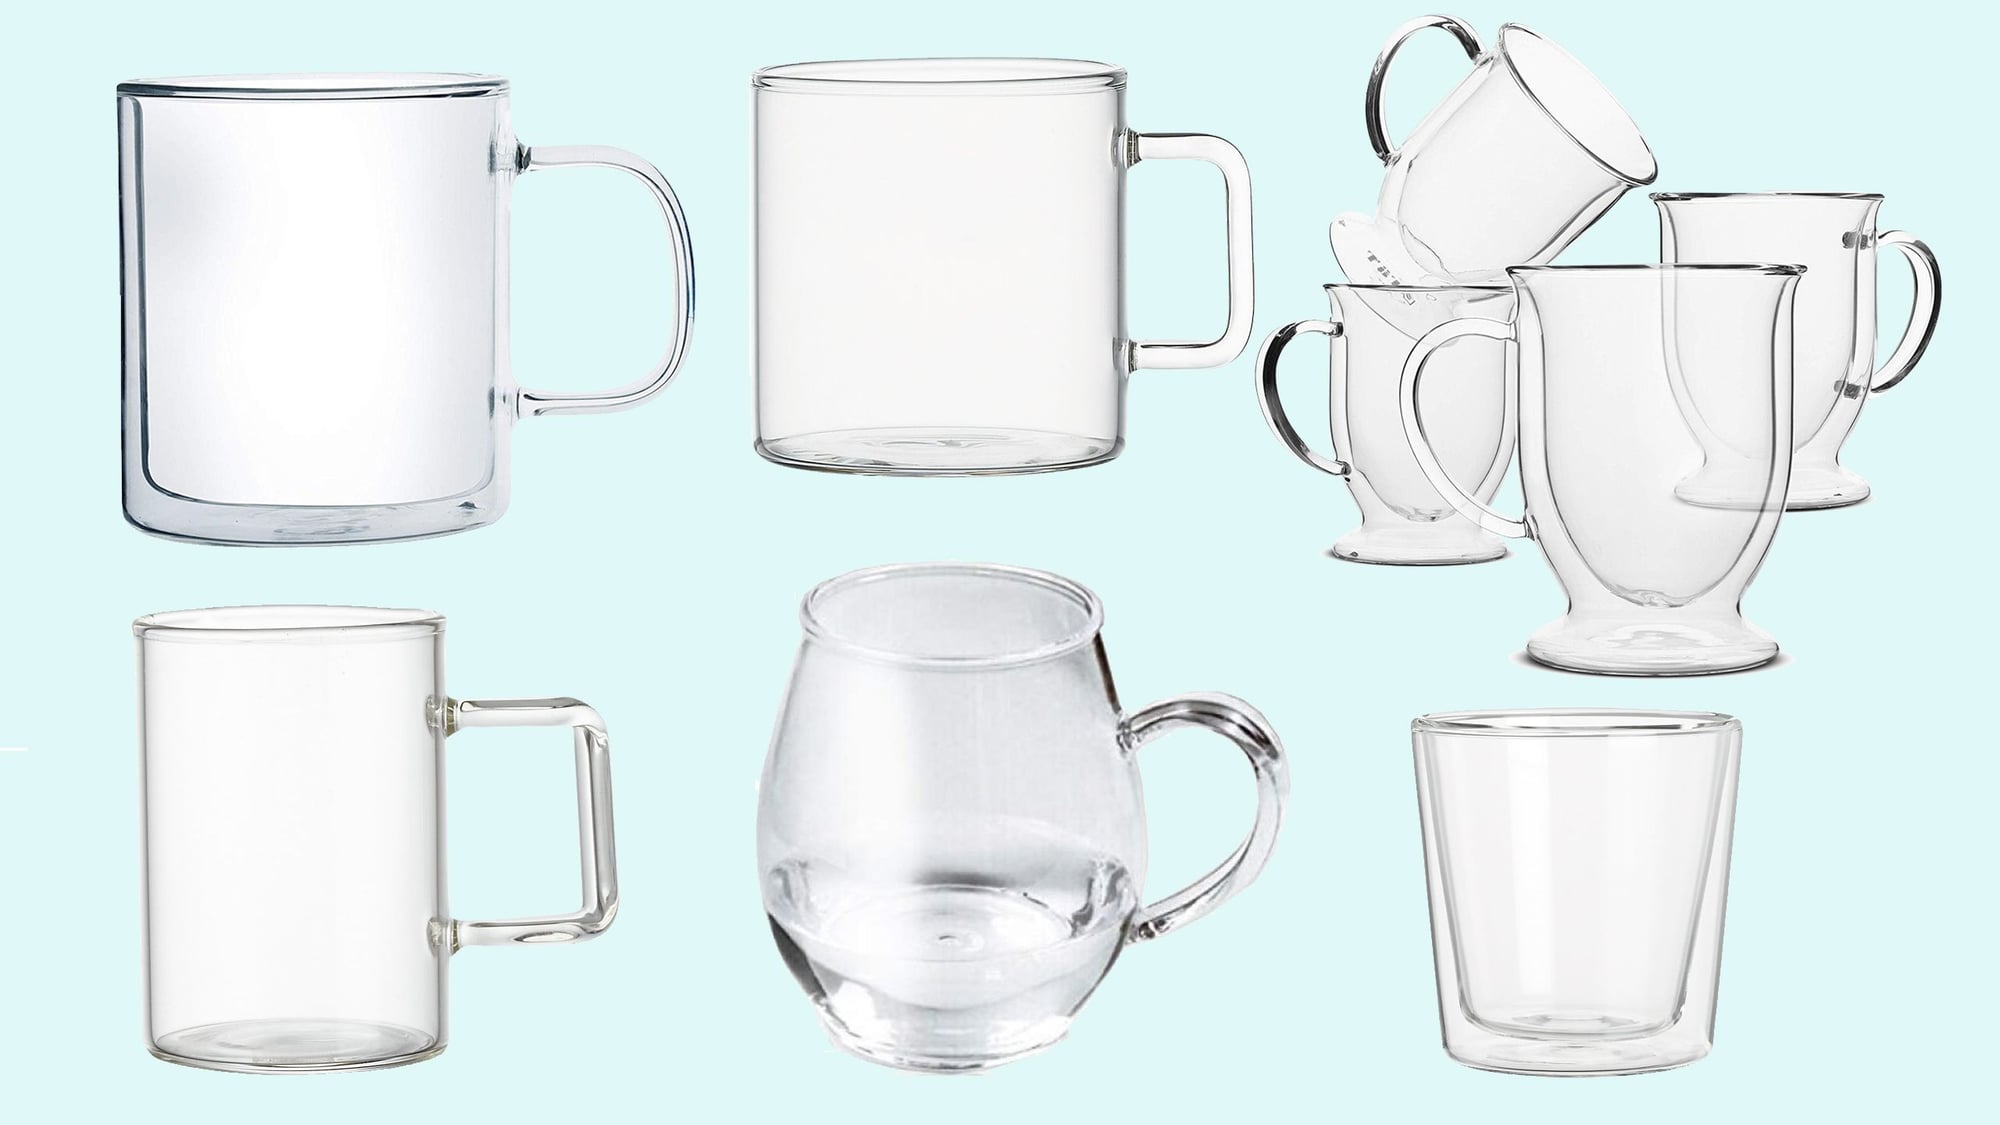 Stylish, affordable cups and mugs featured in Gap and Walmart's upcoming 